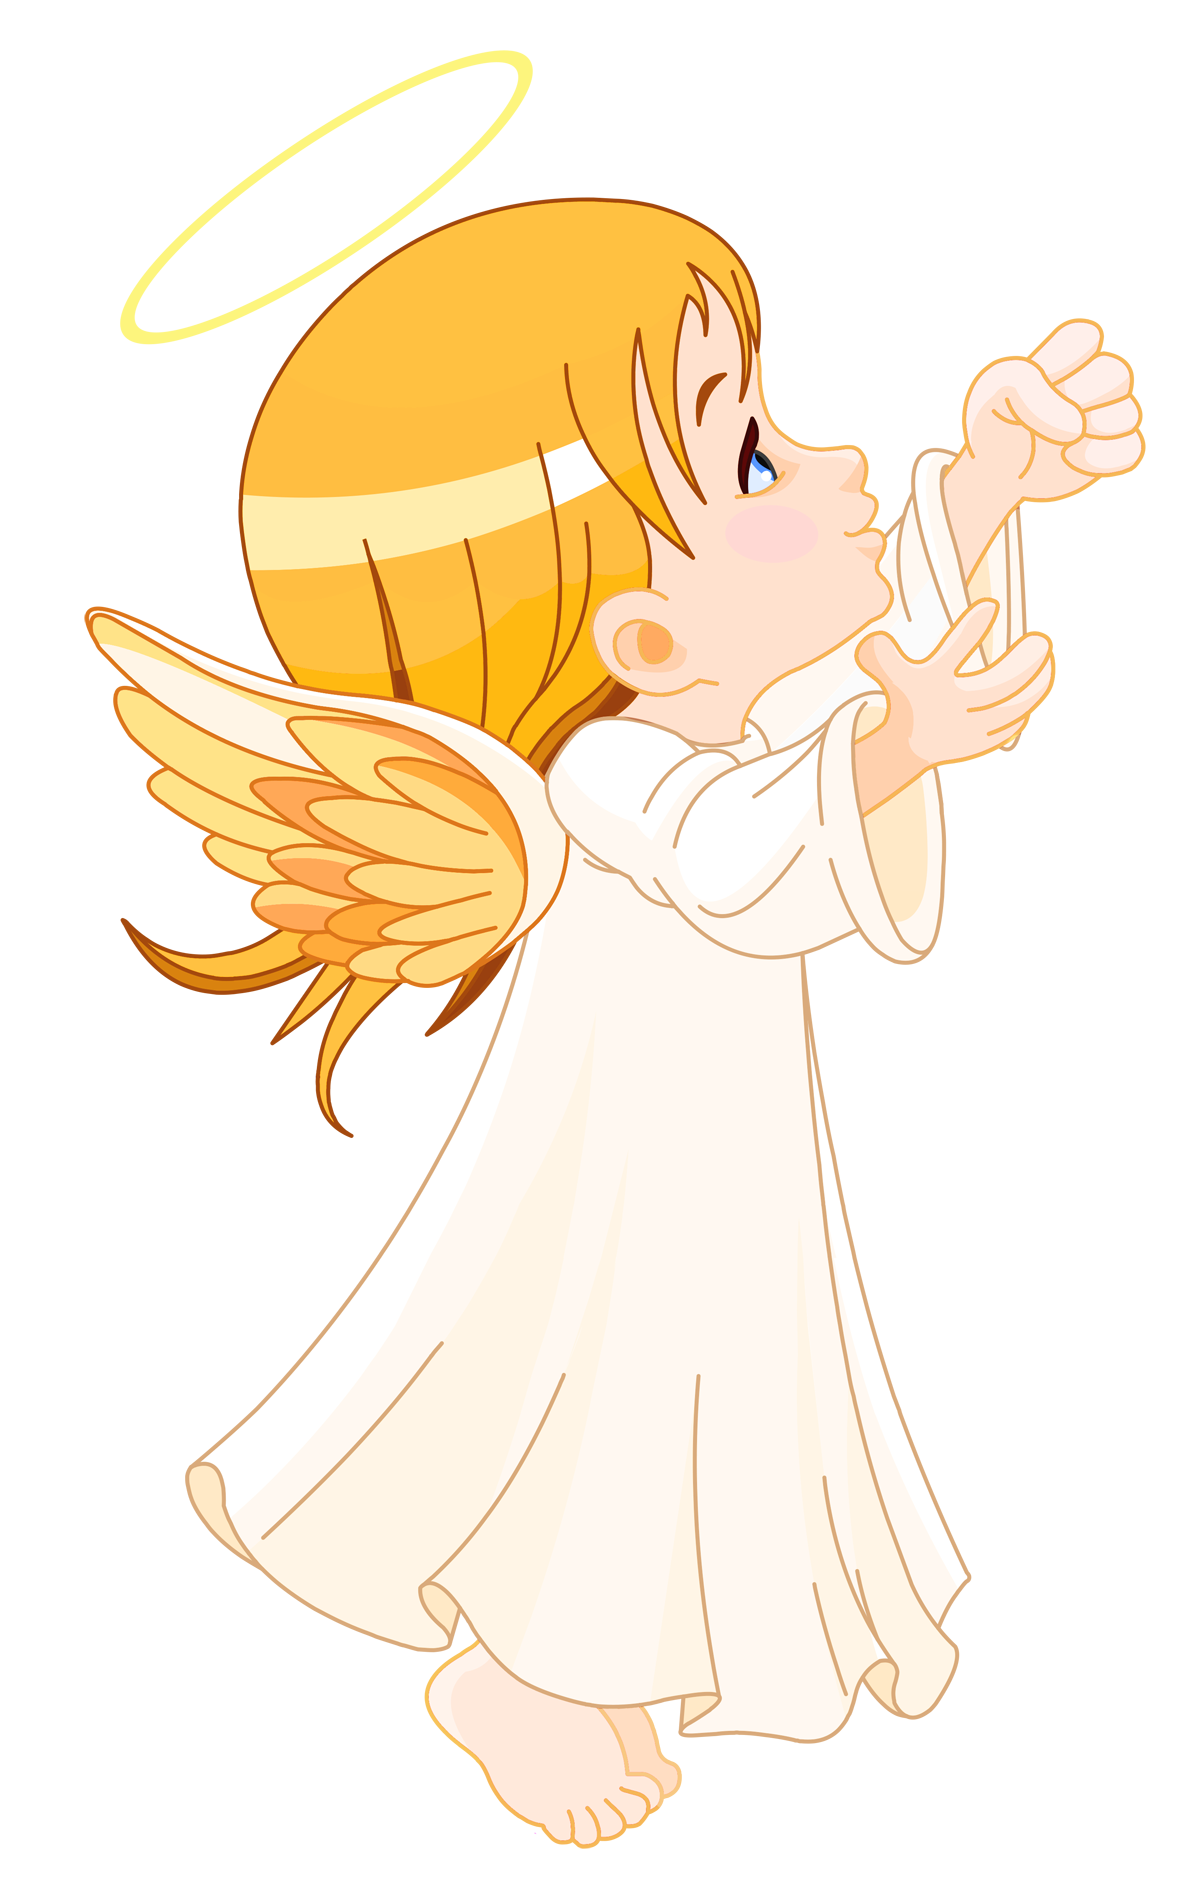 Download Angel PNG Image for Free.